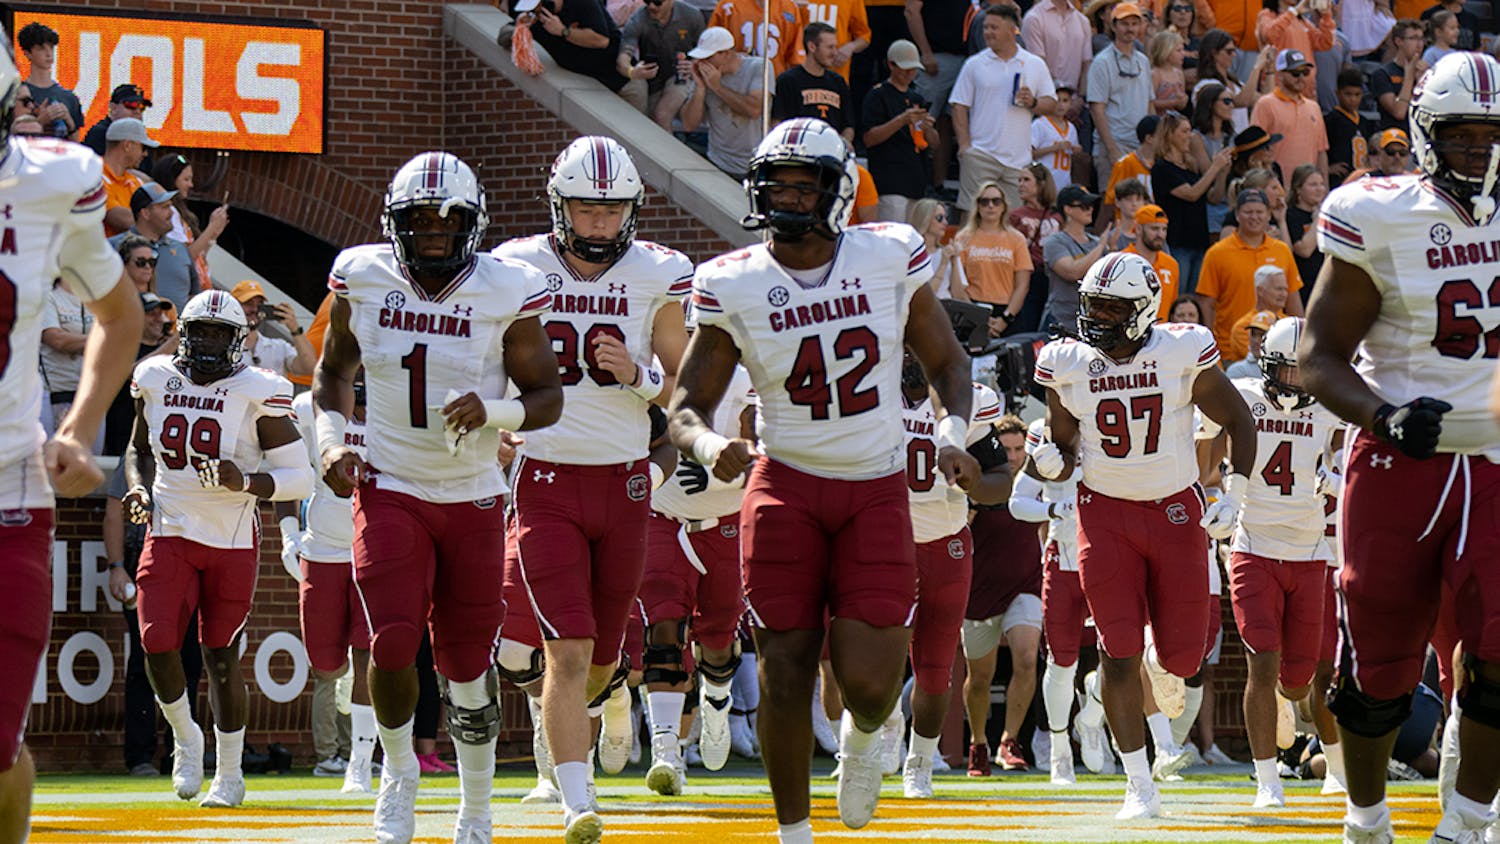 The Gamecocks run out onto the field of Neyland Stadium before facing off the Volunteers on Oct. 9, 2021.
